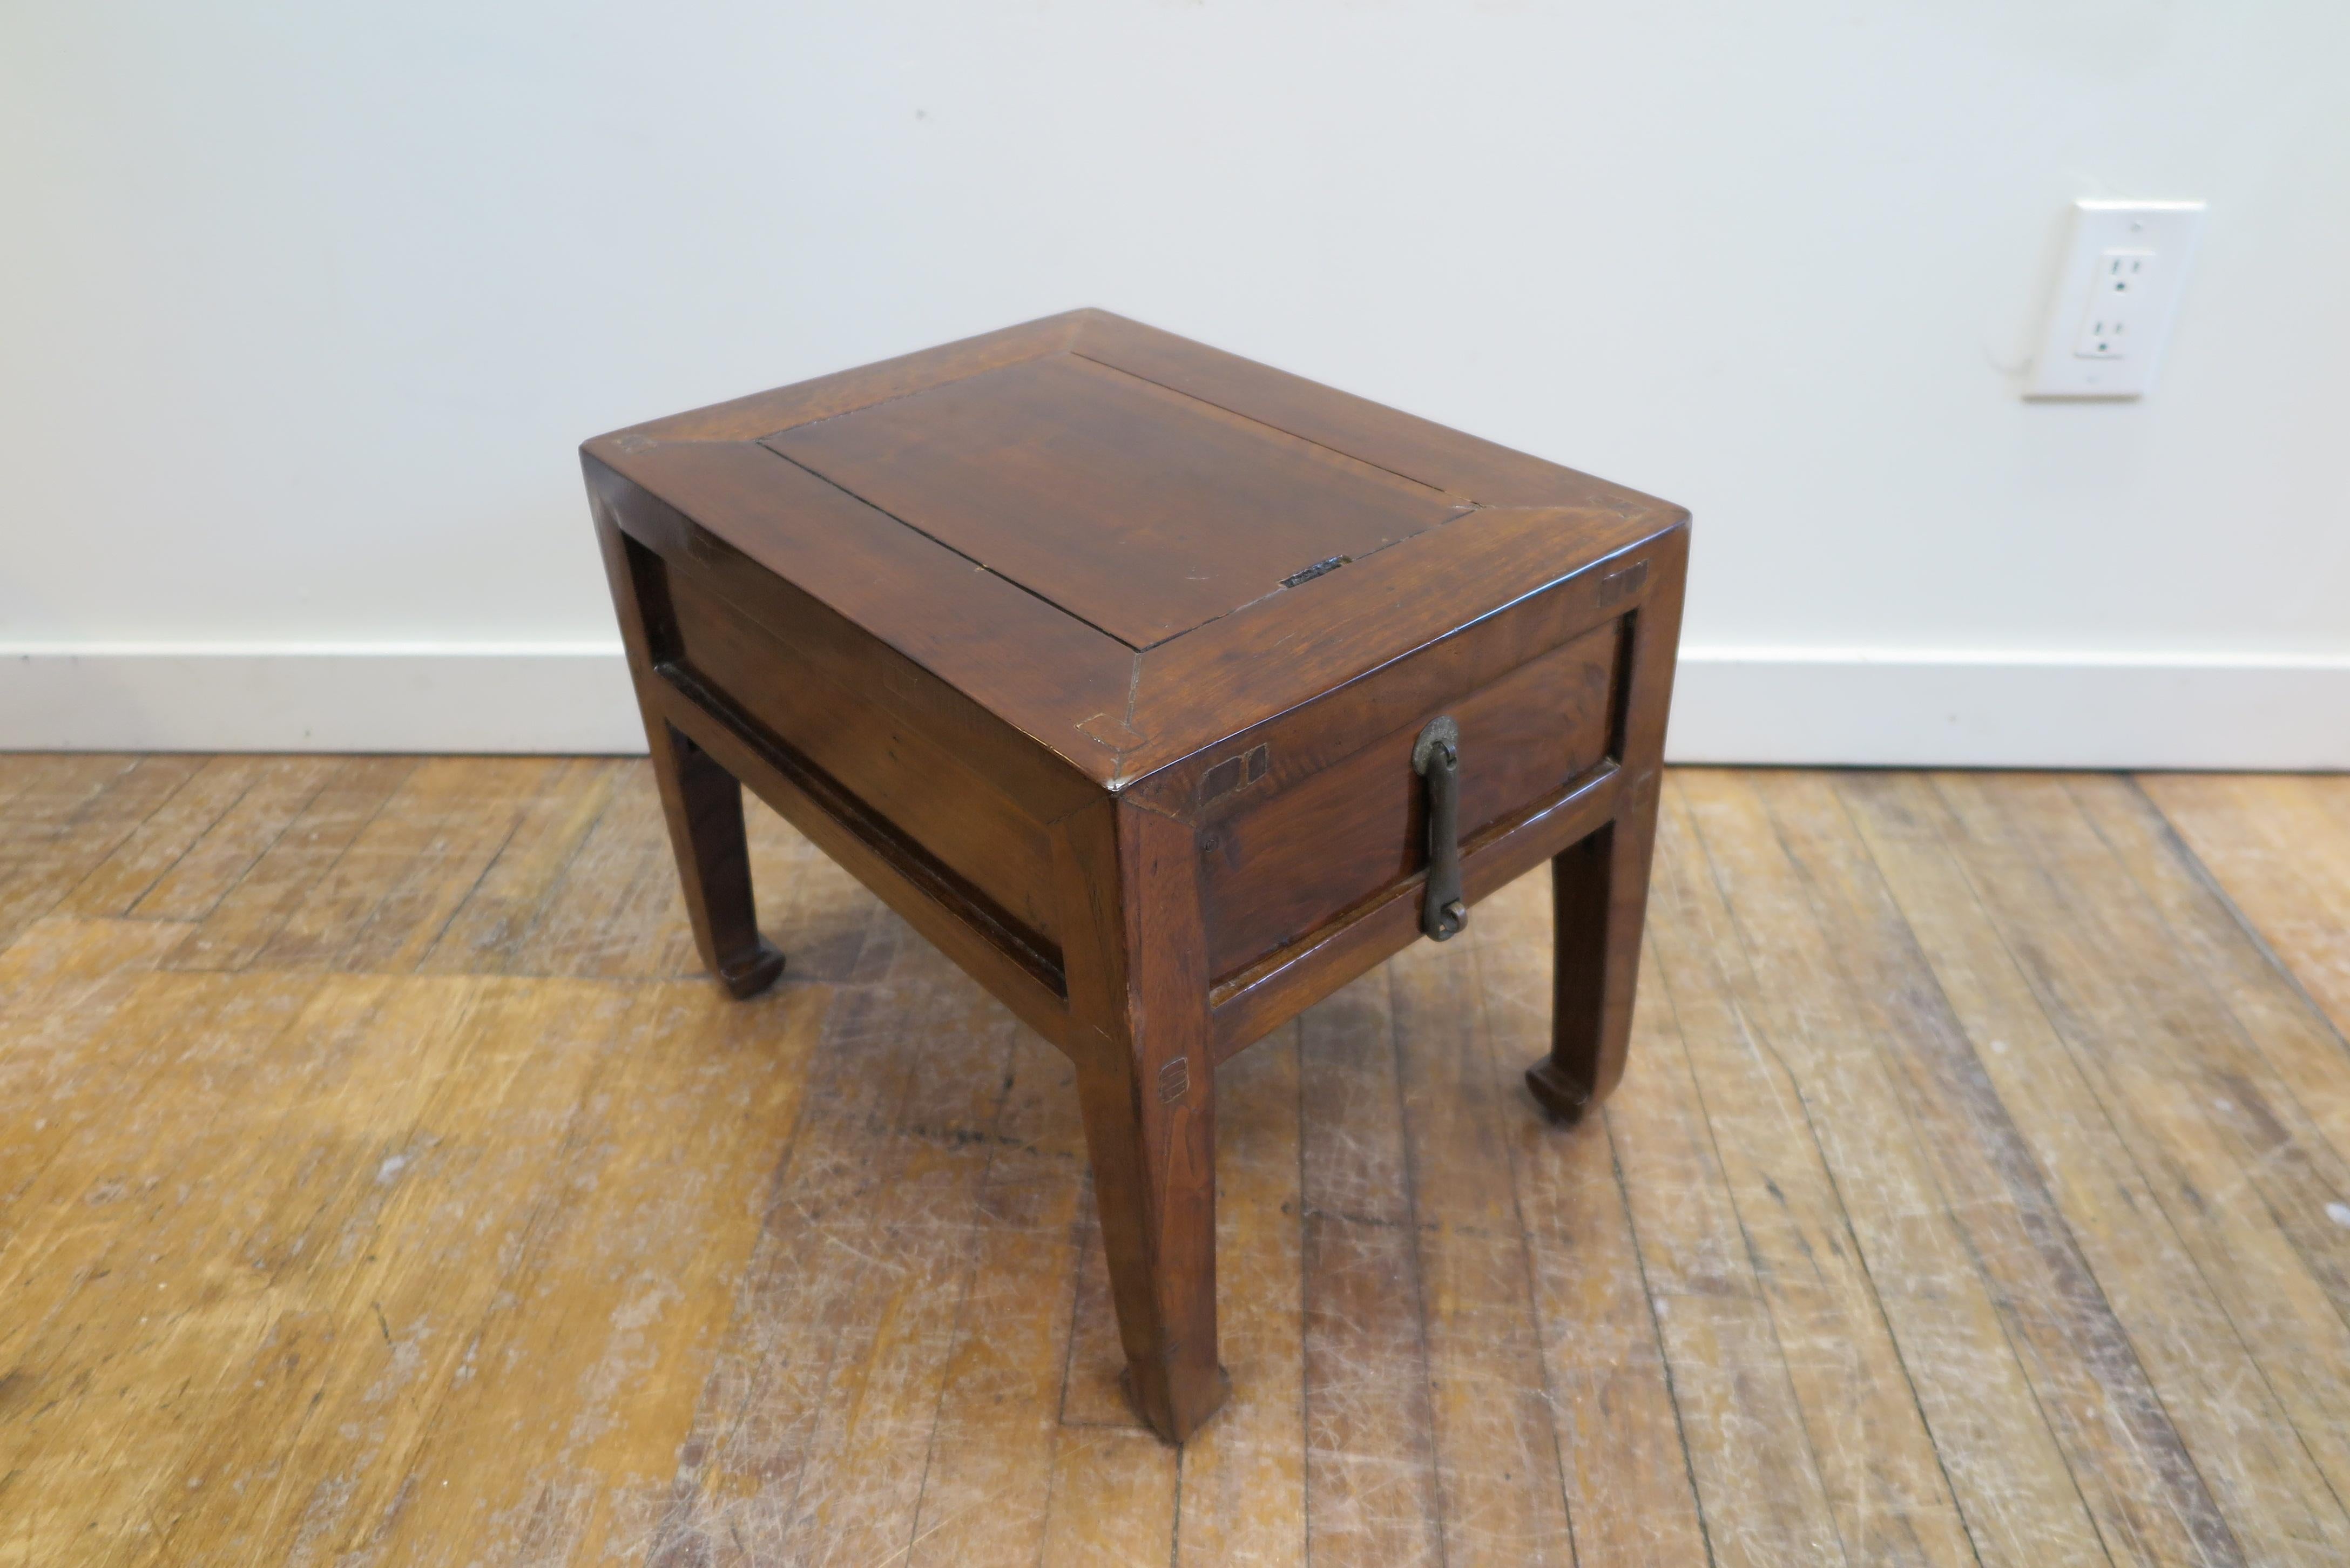 19th century money table, Chinese low table. A small low table of pear wood with one drawer.
Cut into the top is a slot. This opening is to receive money. A merchant would do business on the table and the customer would pay depositing money into